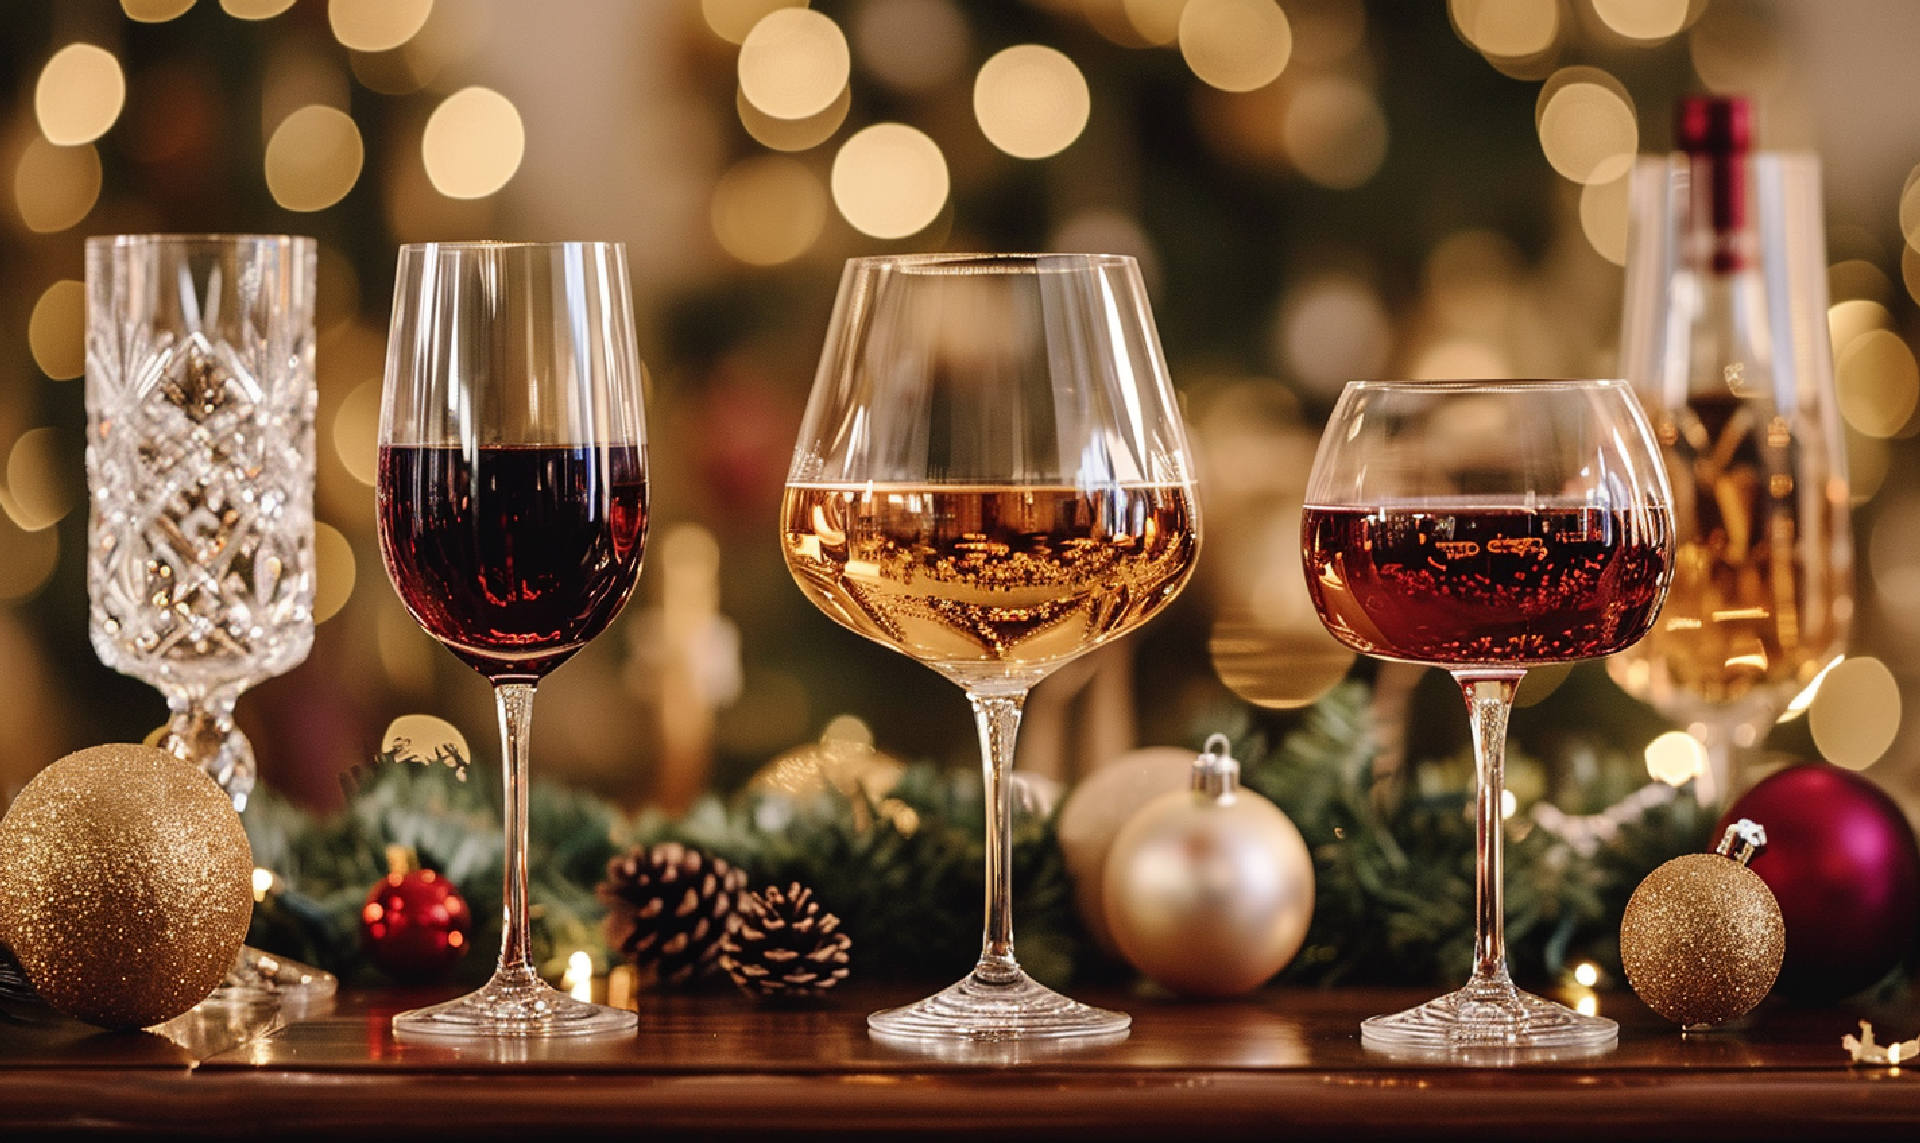 A selection of the top 10 stemware pieces, showcasing elegant designs perfect for holiday gifting.